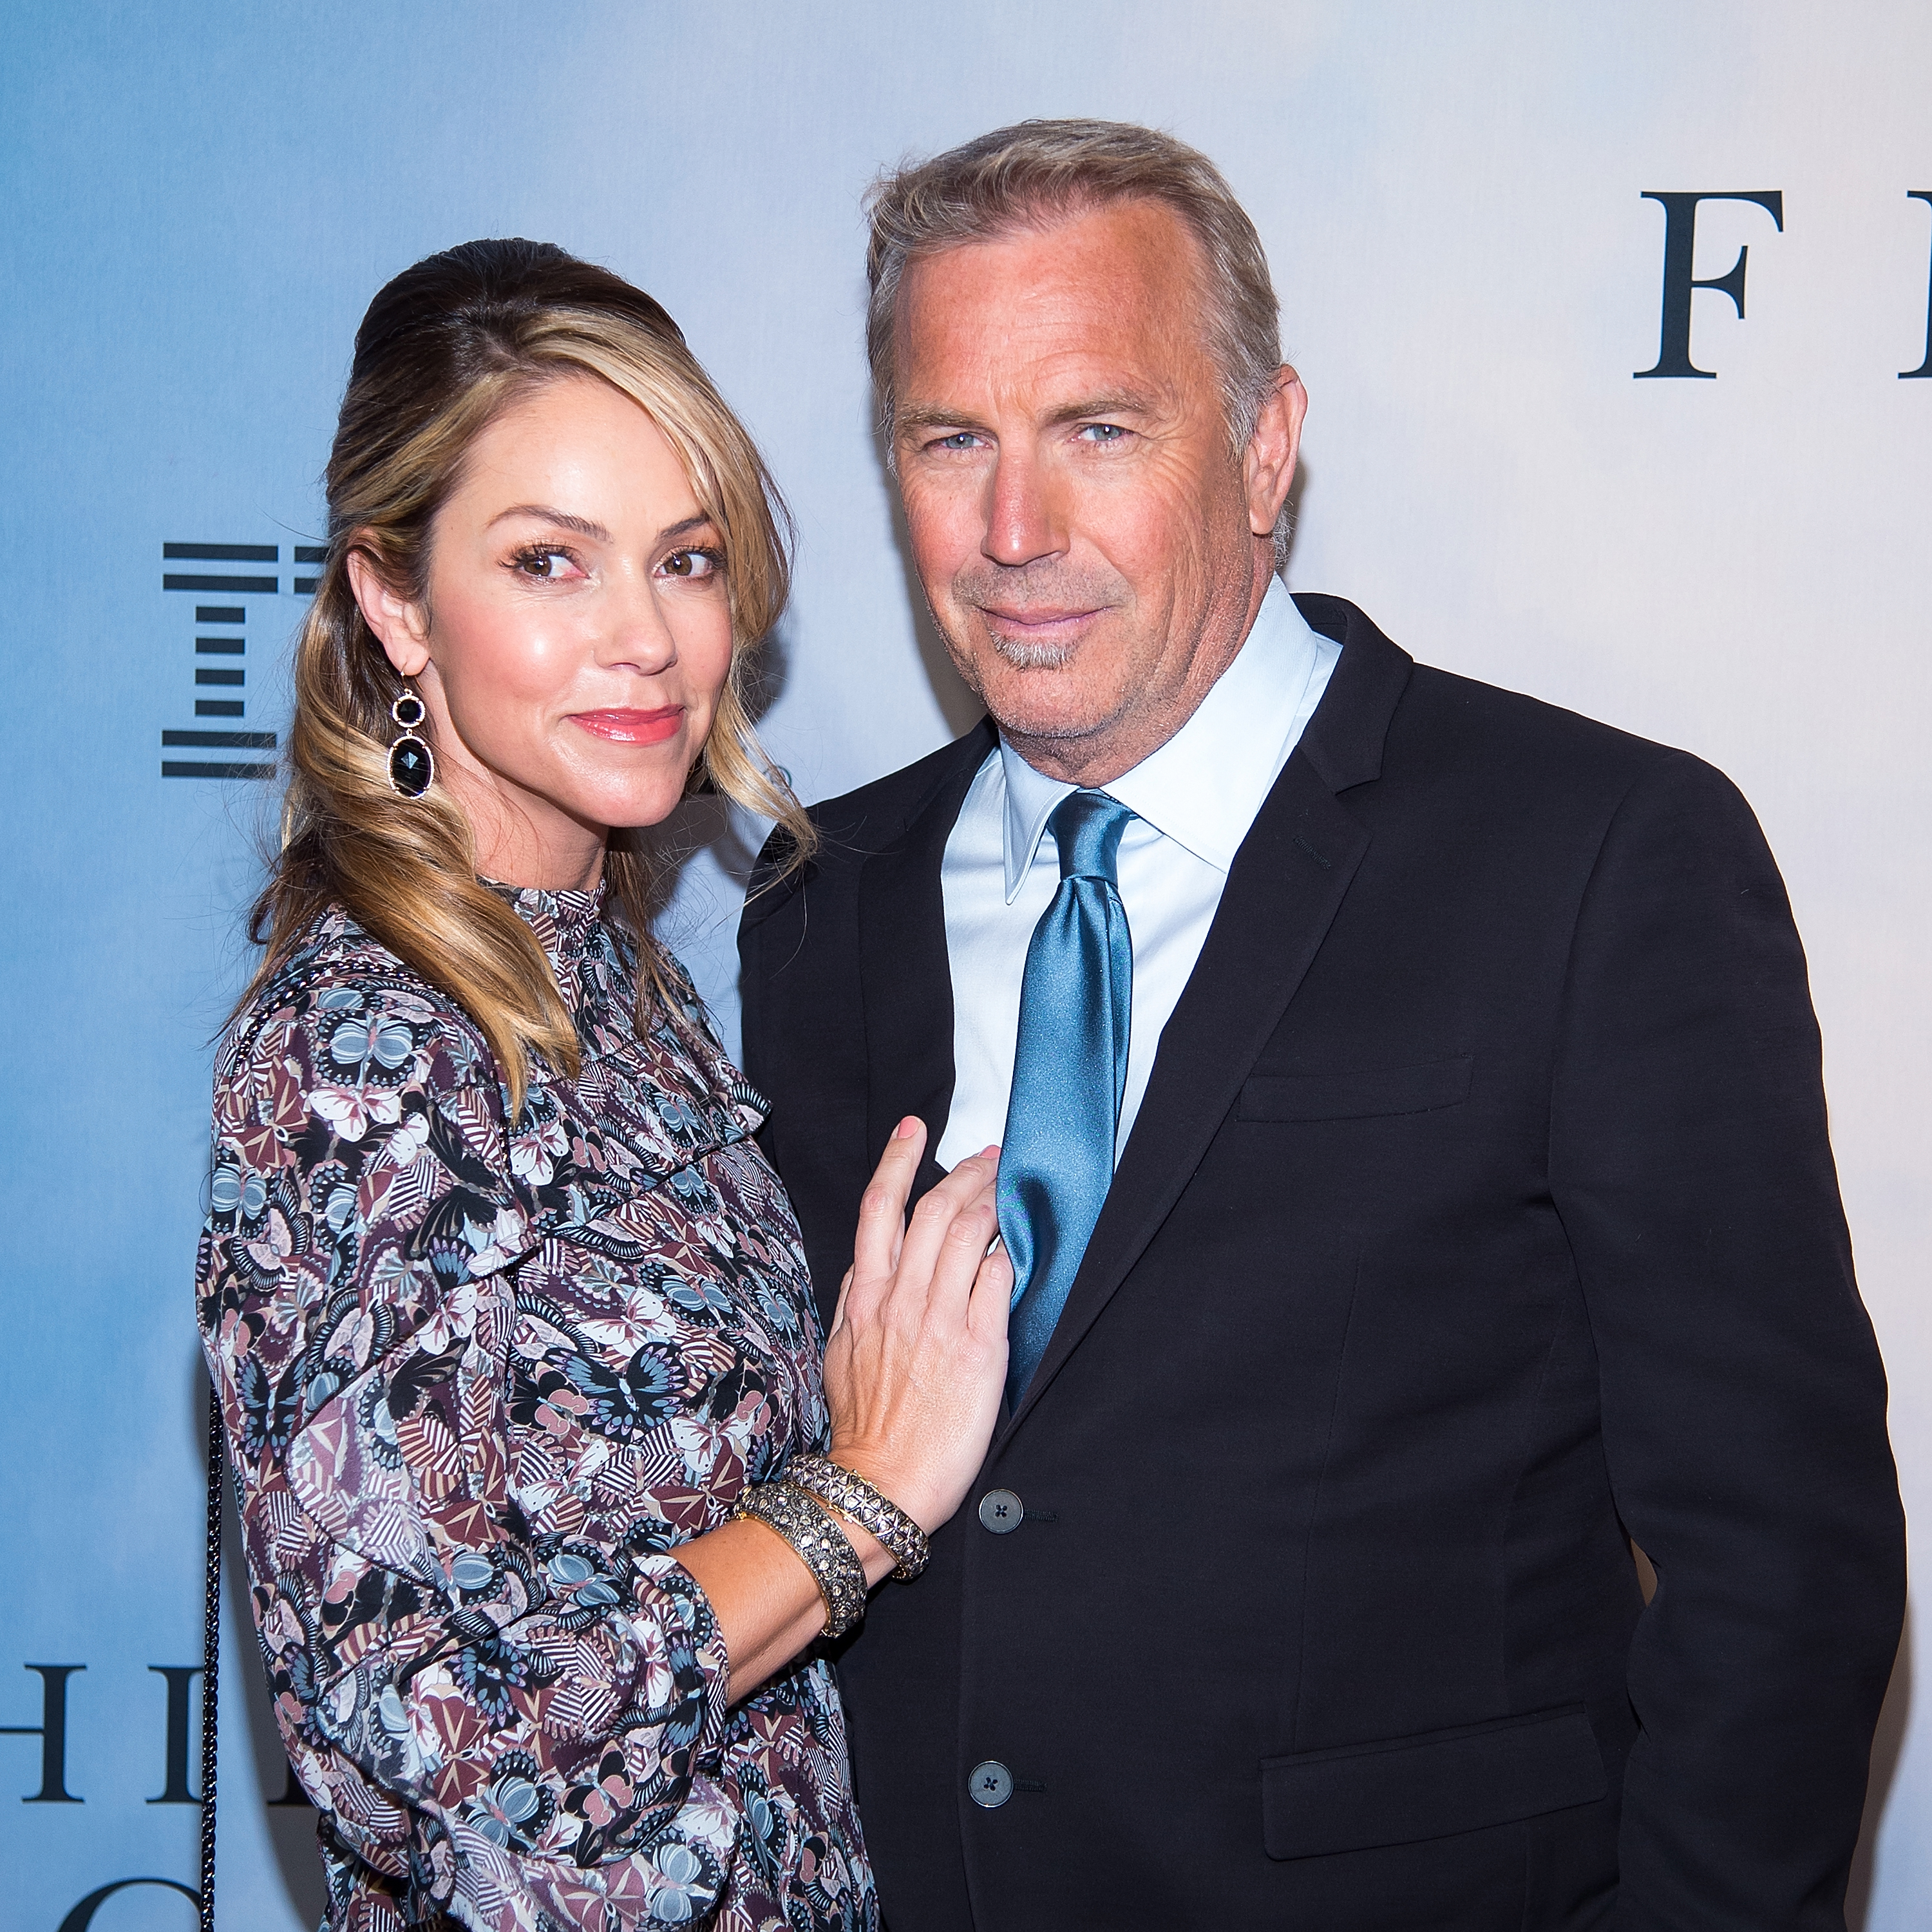 Christine Baumgartner and Kevin Costner at the special screening of "Hidden Figures" on December 10, 2016 in New York City | Source: Getty Images